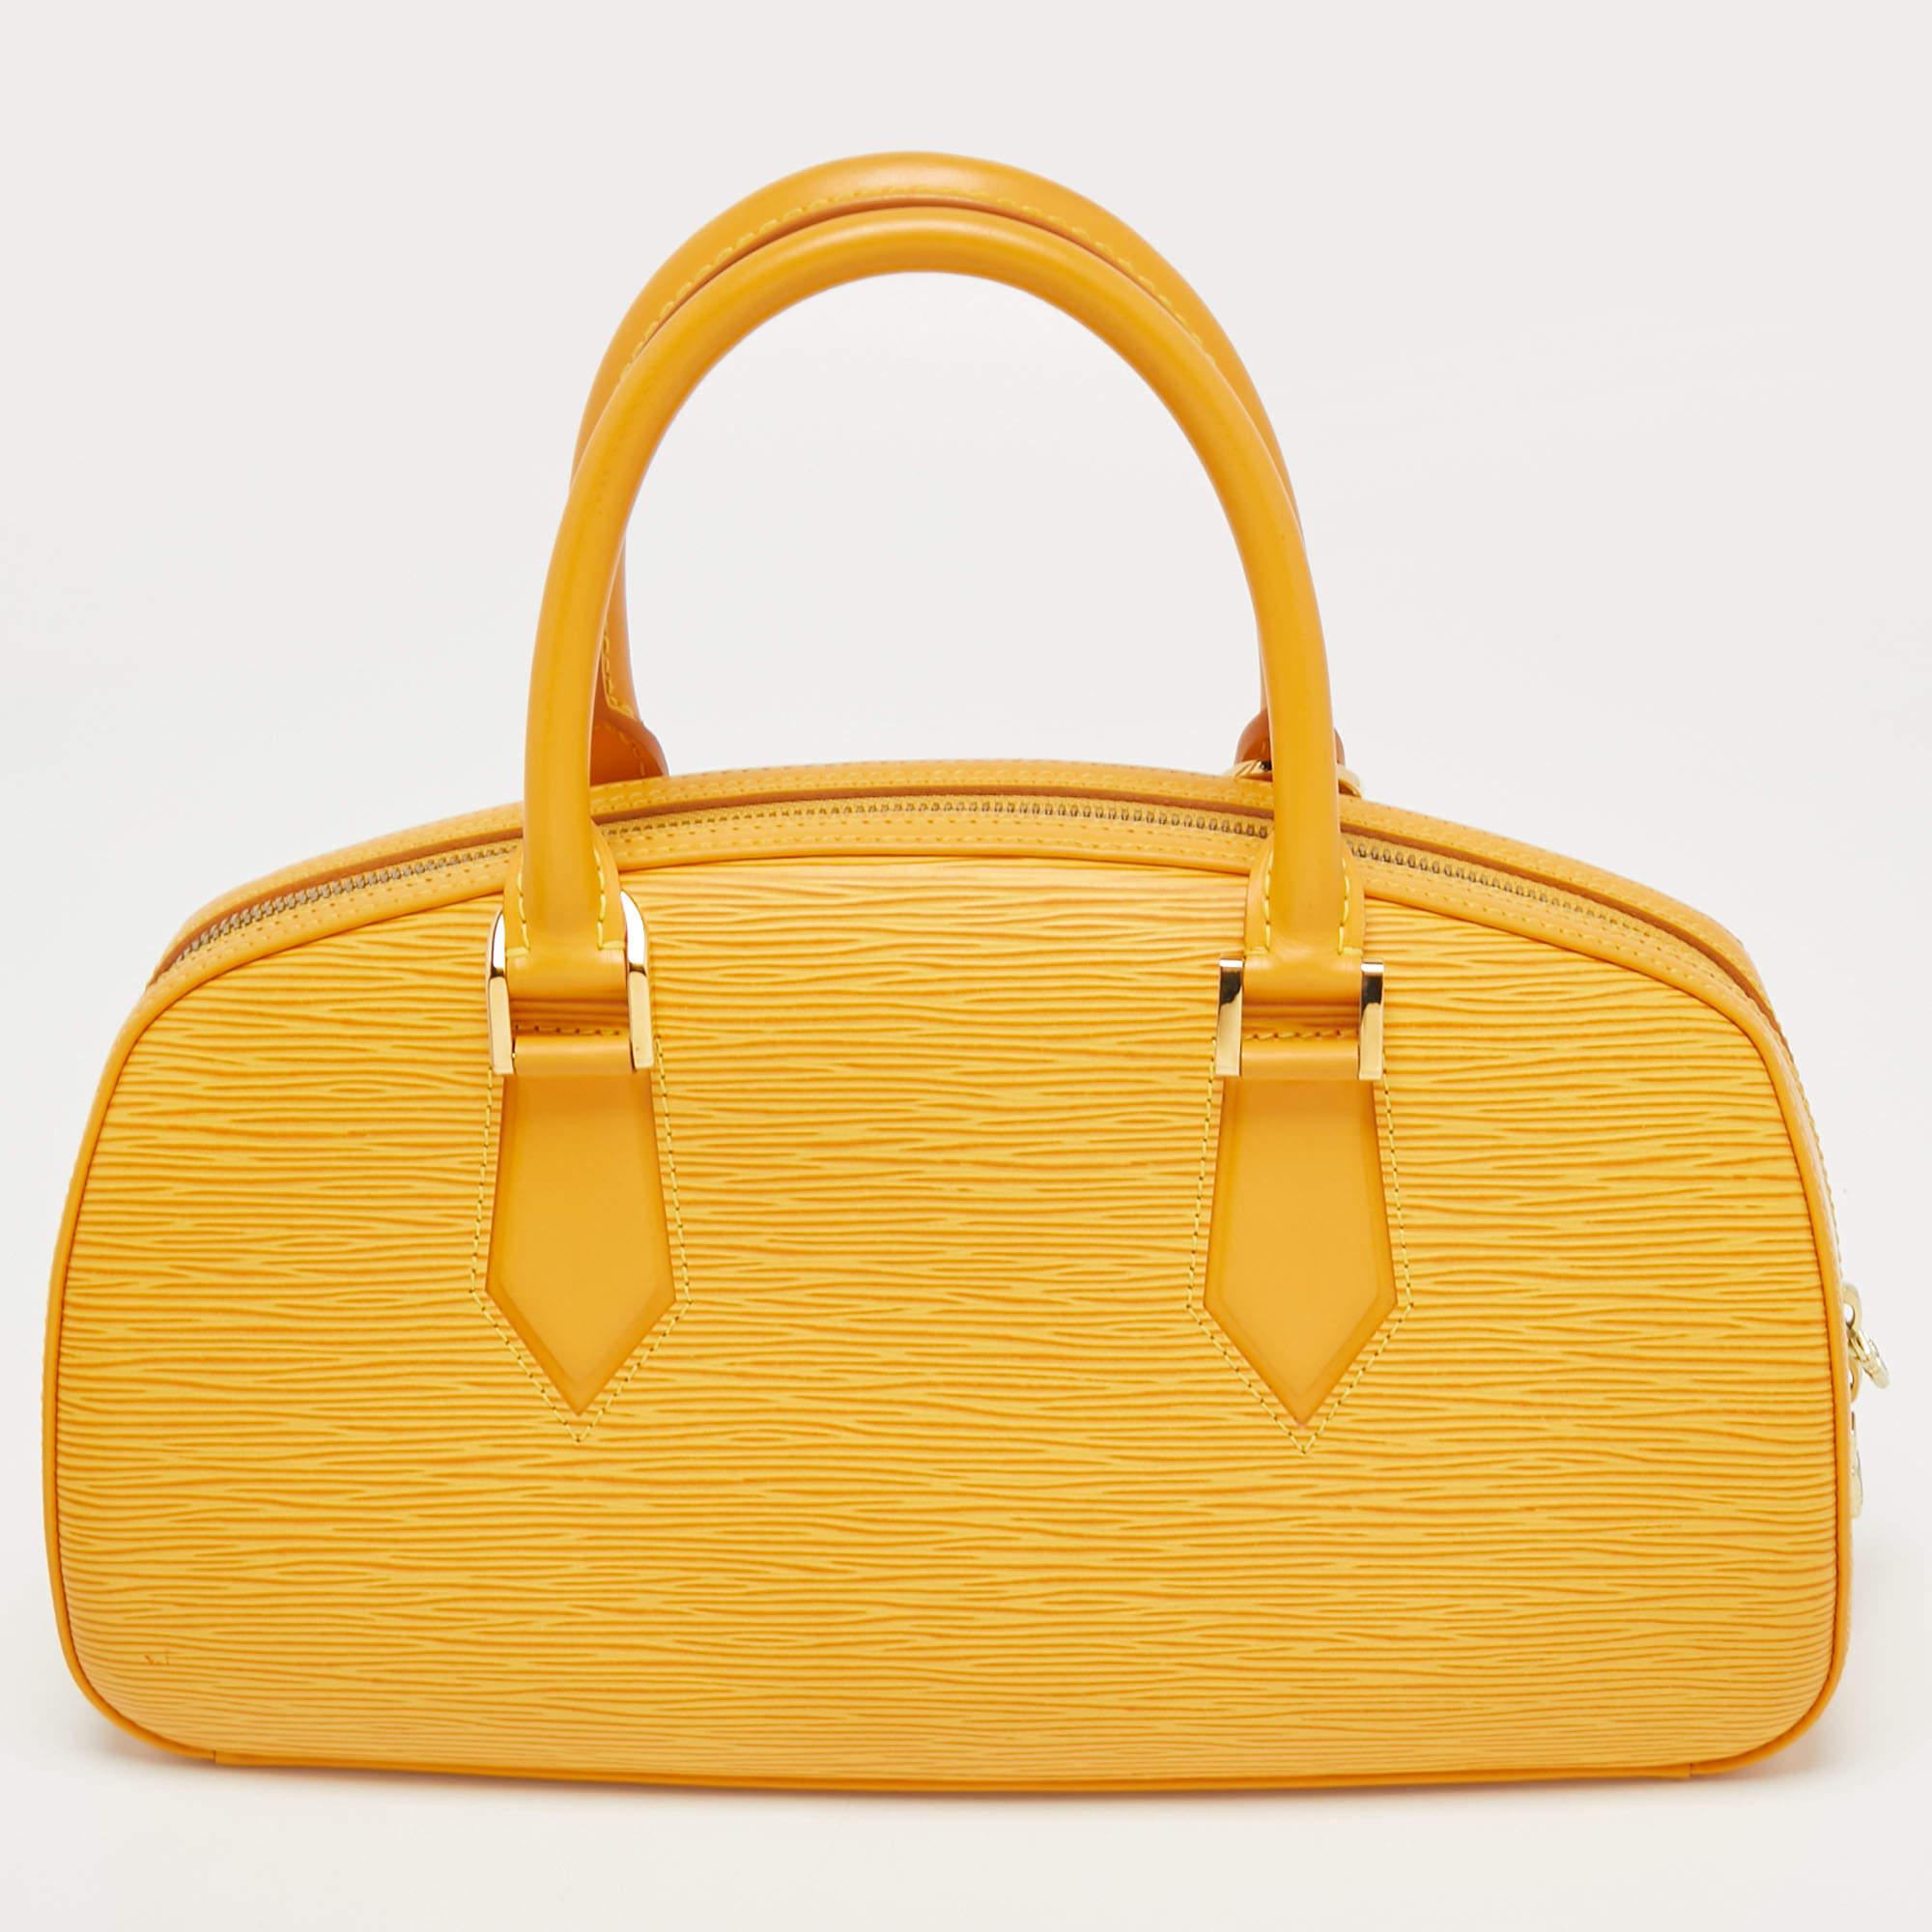 An essential wardrobe accessory, this Louis Vuitton handbag is a must-have. Crafted from smooth Epi leather, this bag is styled with a zip closure that reveals a spacious Alcantara interior. It is finished with dual handles and gold-tone hardware.